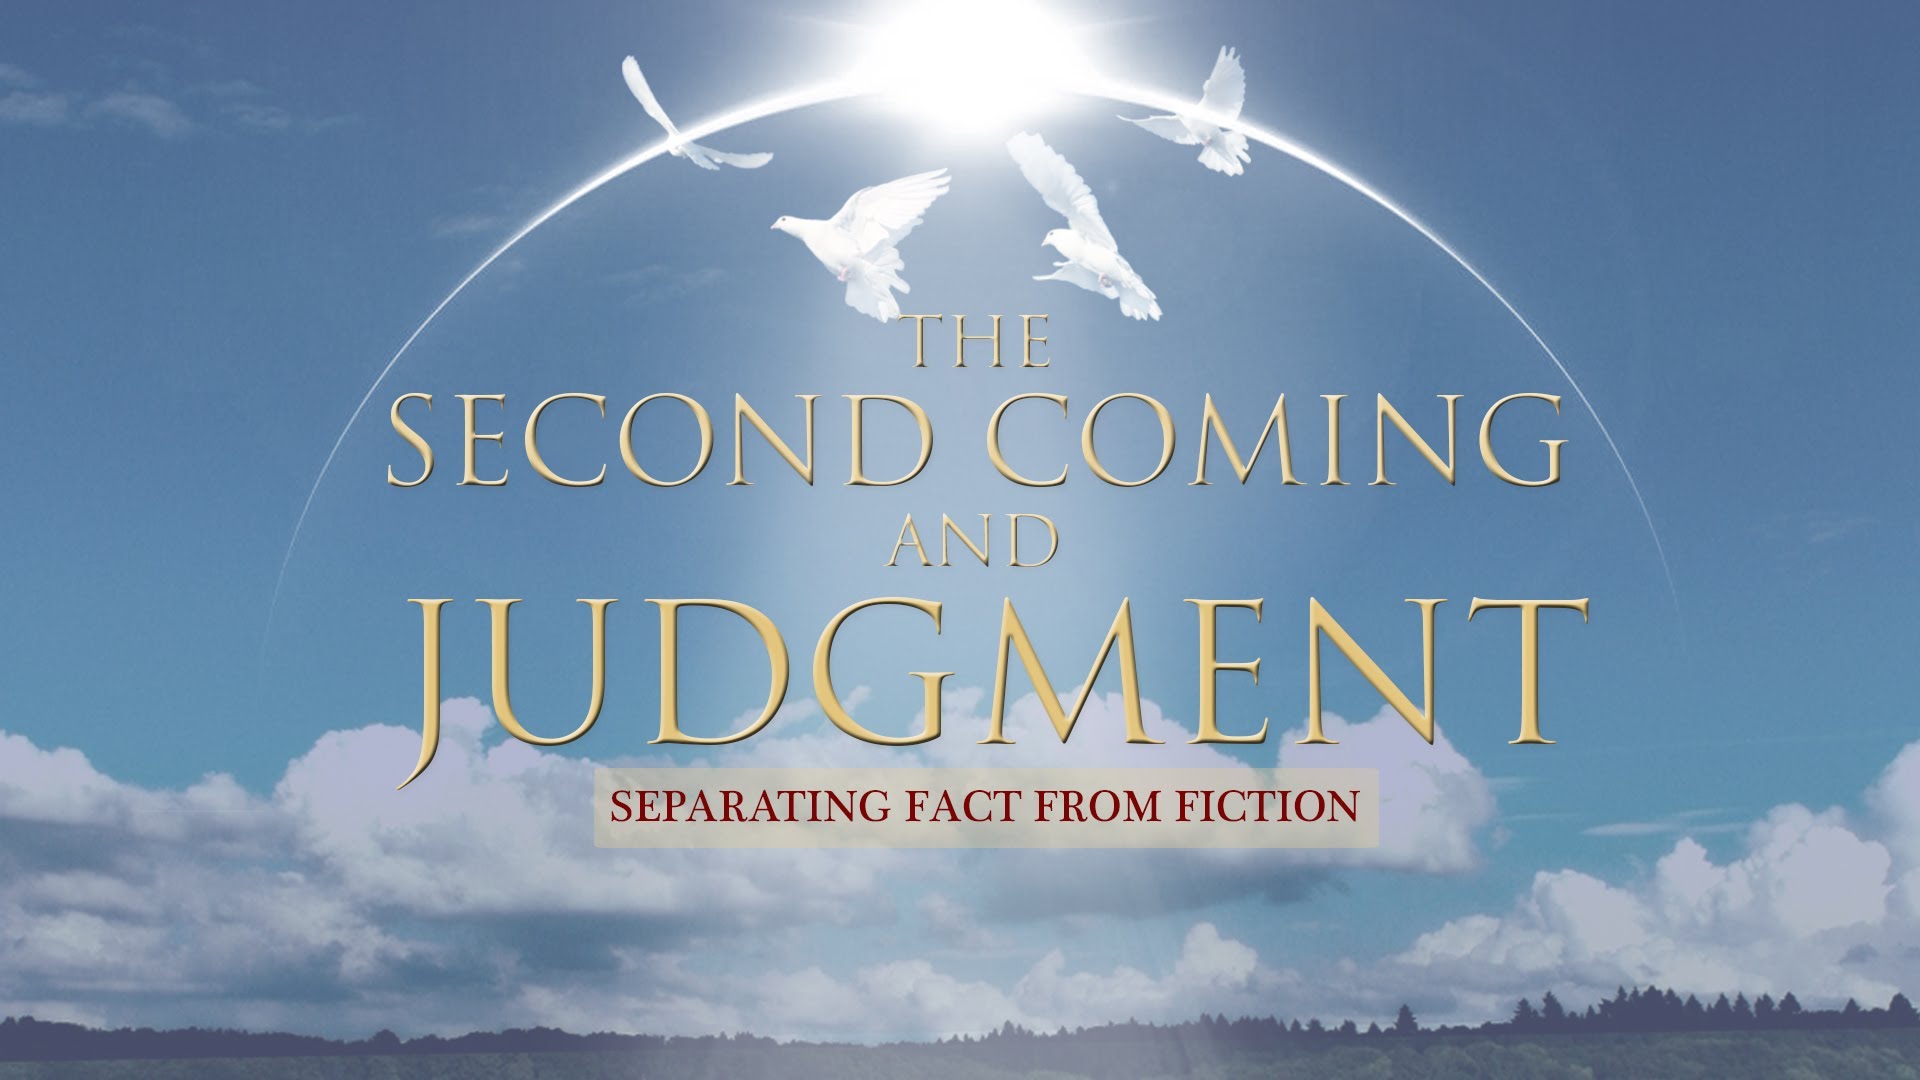 What Did Jesus Intend to Judge? | Smoodock&#39;s Blog